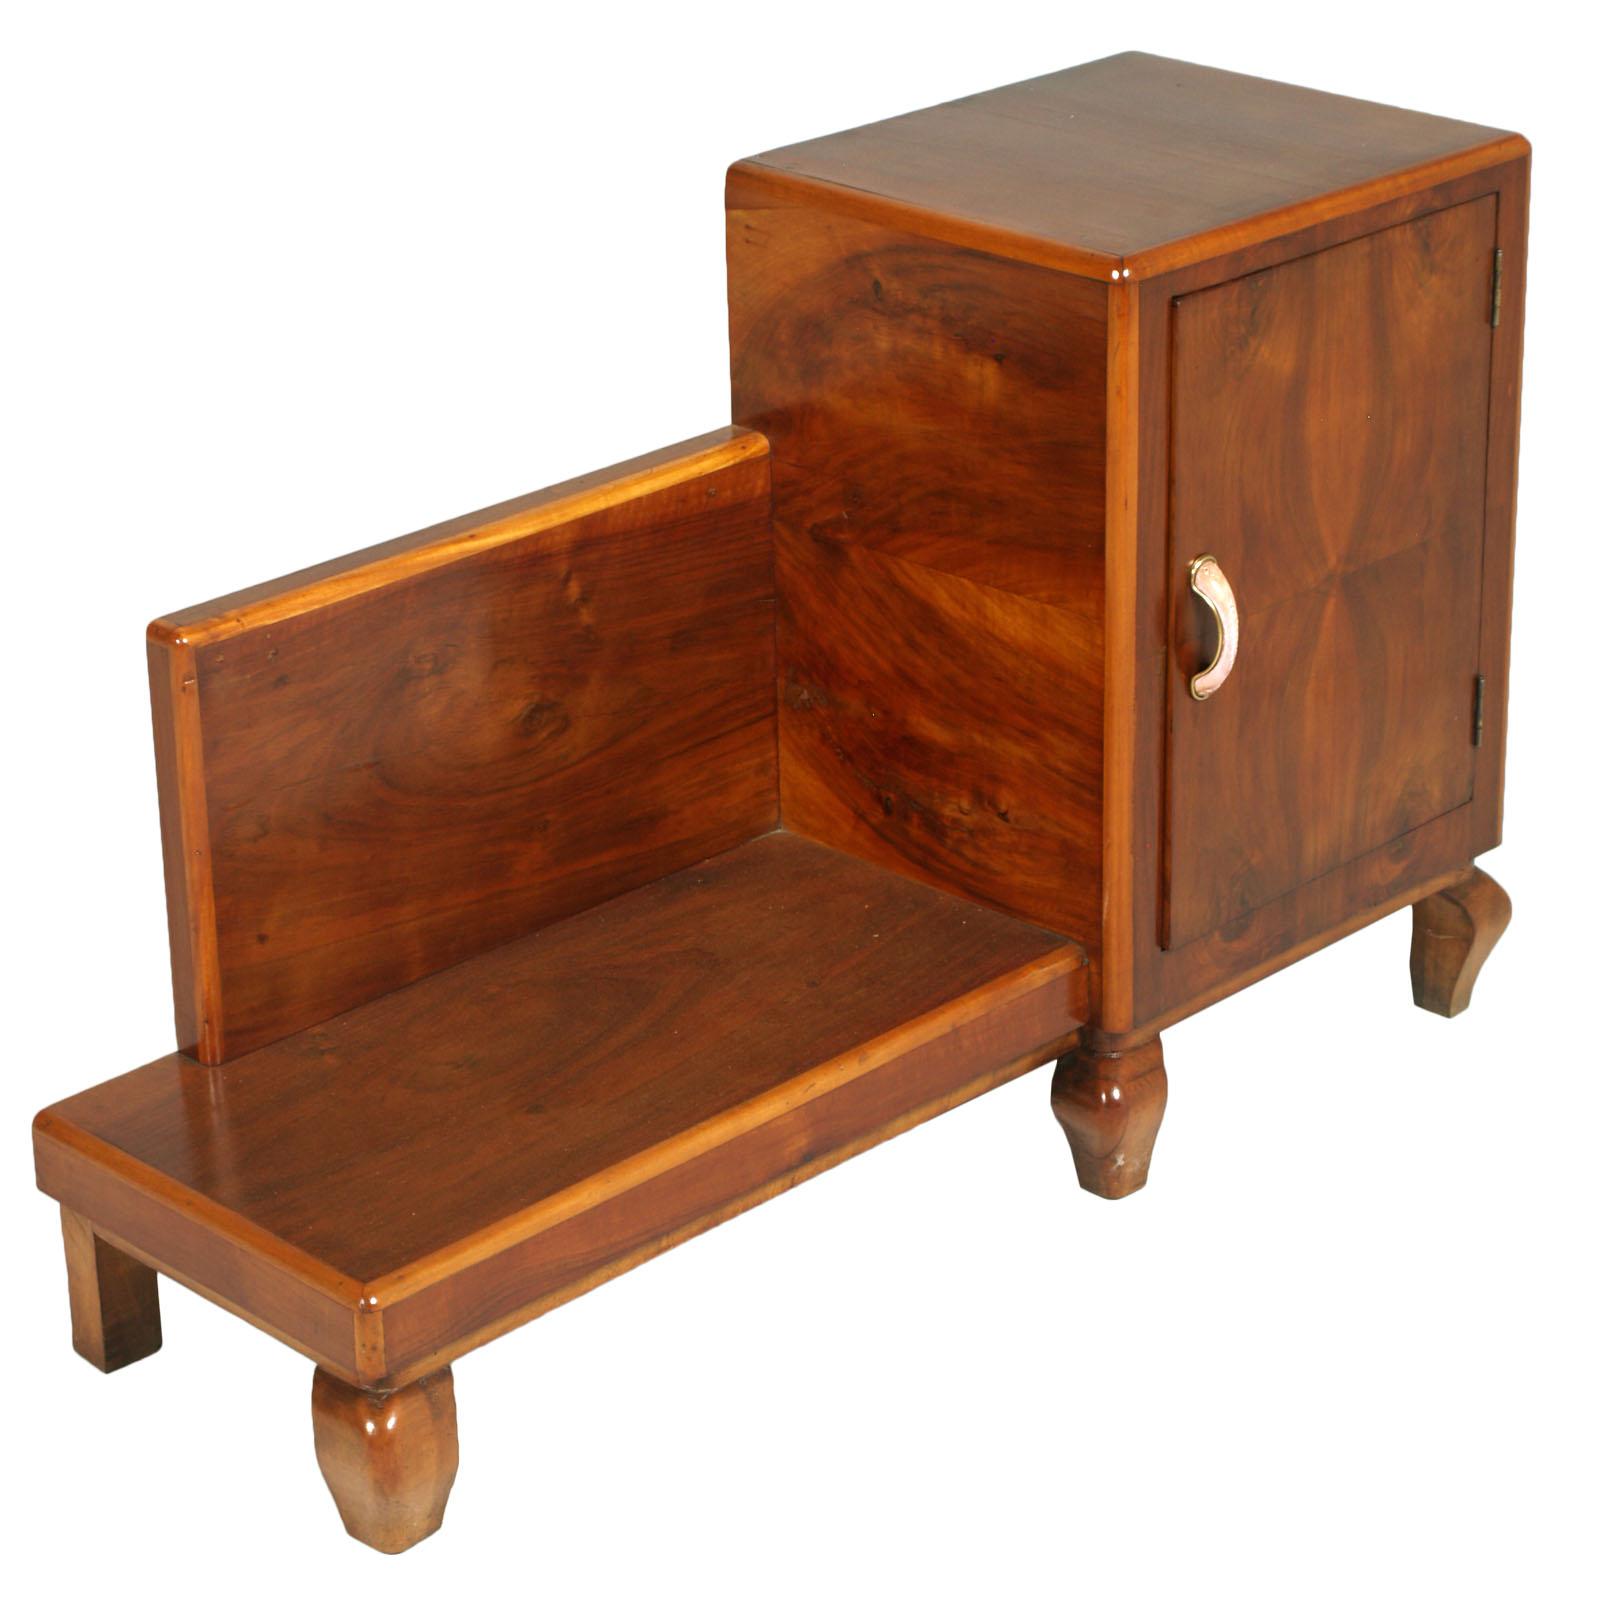 1930s Art Deco entrance cabinet, console in solid blond walnut and veneered walnut restored and published to wax

Measures cm: H 66\20, W 103, D 36.